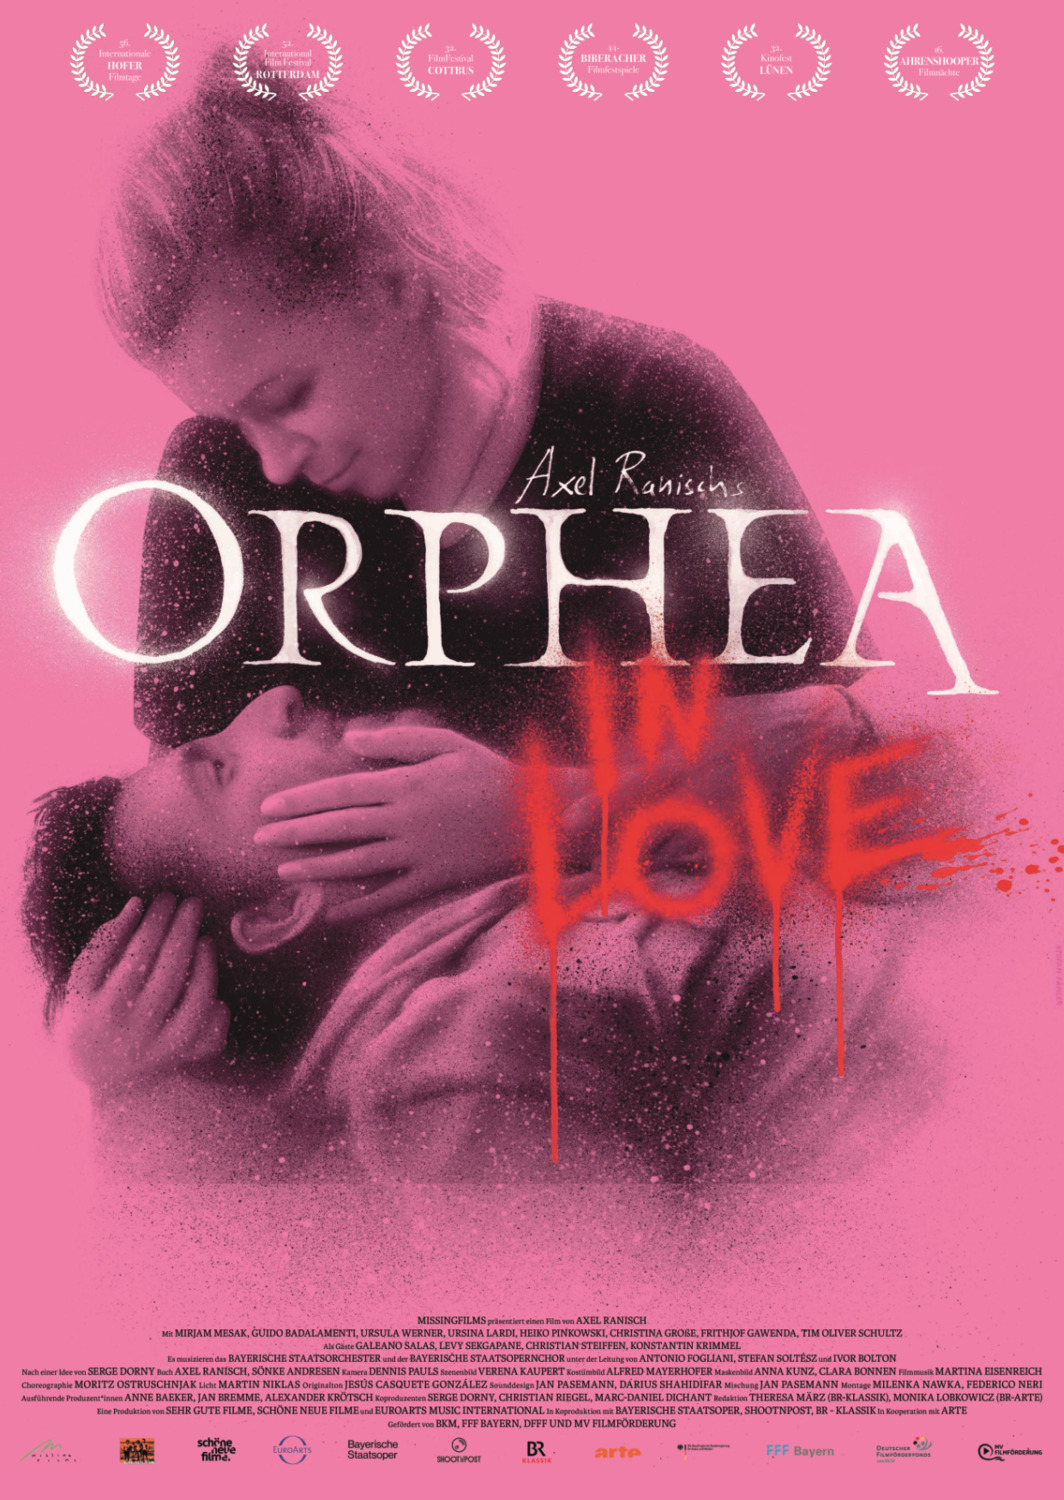 Extra Large Movie Poster Image for Orphea in Love 